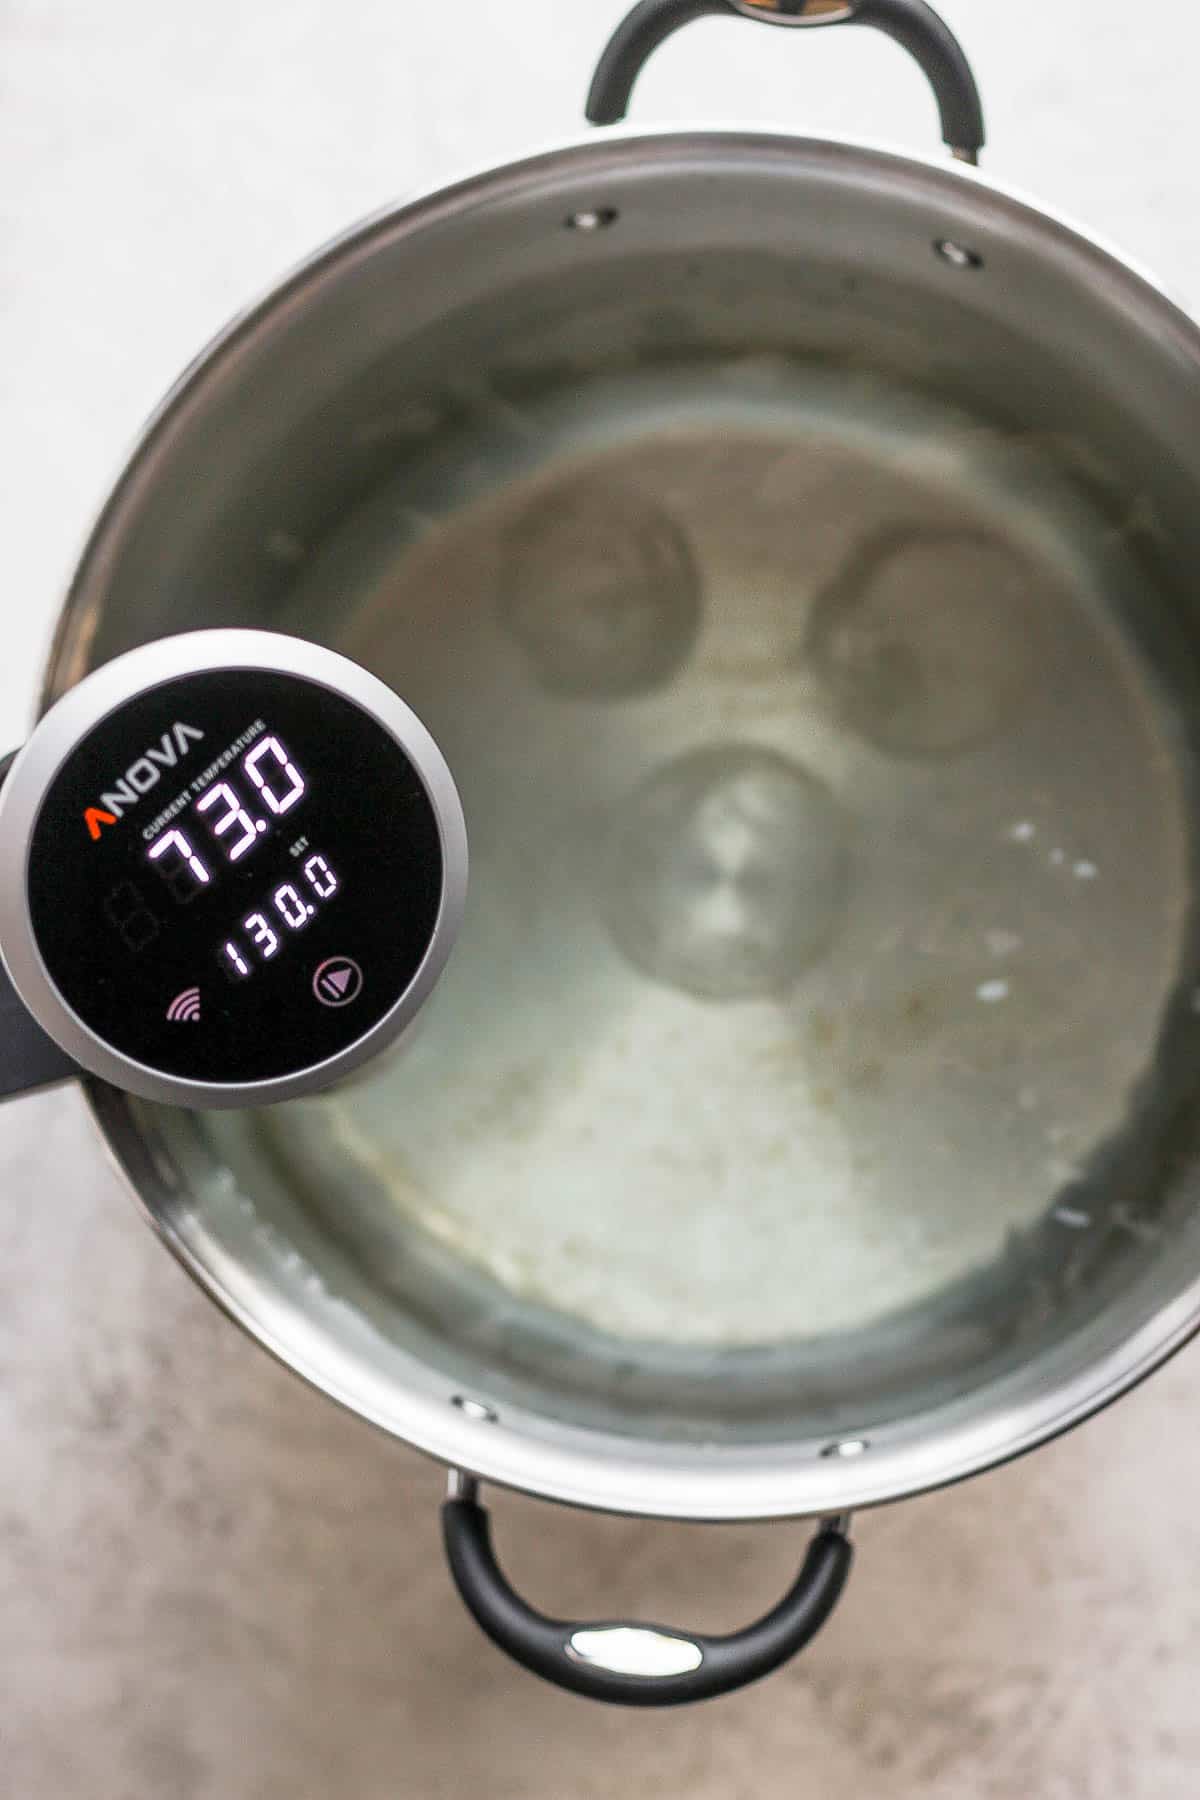 A sous vide set to 130 degrees attached to the side of a pot of water.